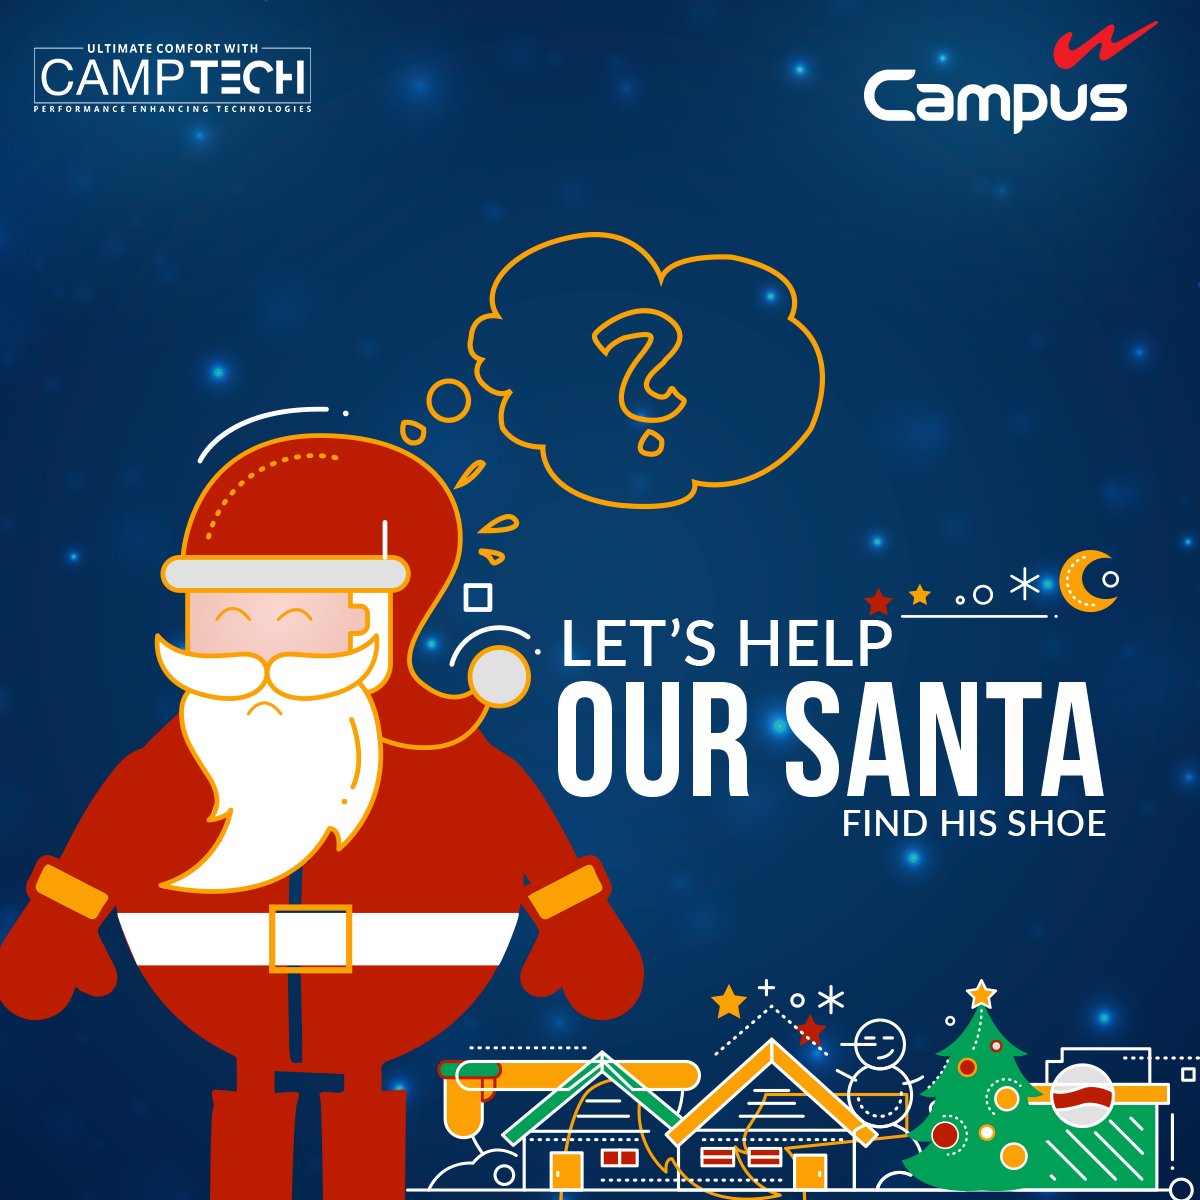 Our beloved Santa has somehow lost his shoes. Which #Campus shoe would you like to suggest him this #Christmas & Why? Share your answer in the comment section below to win big. Refer our Website to know more : goo.gl/yrhLeZ #ContestAlert #ChristmasWithCampus #Contest